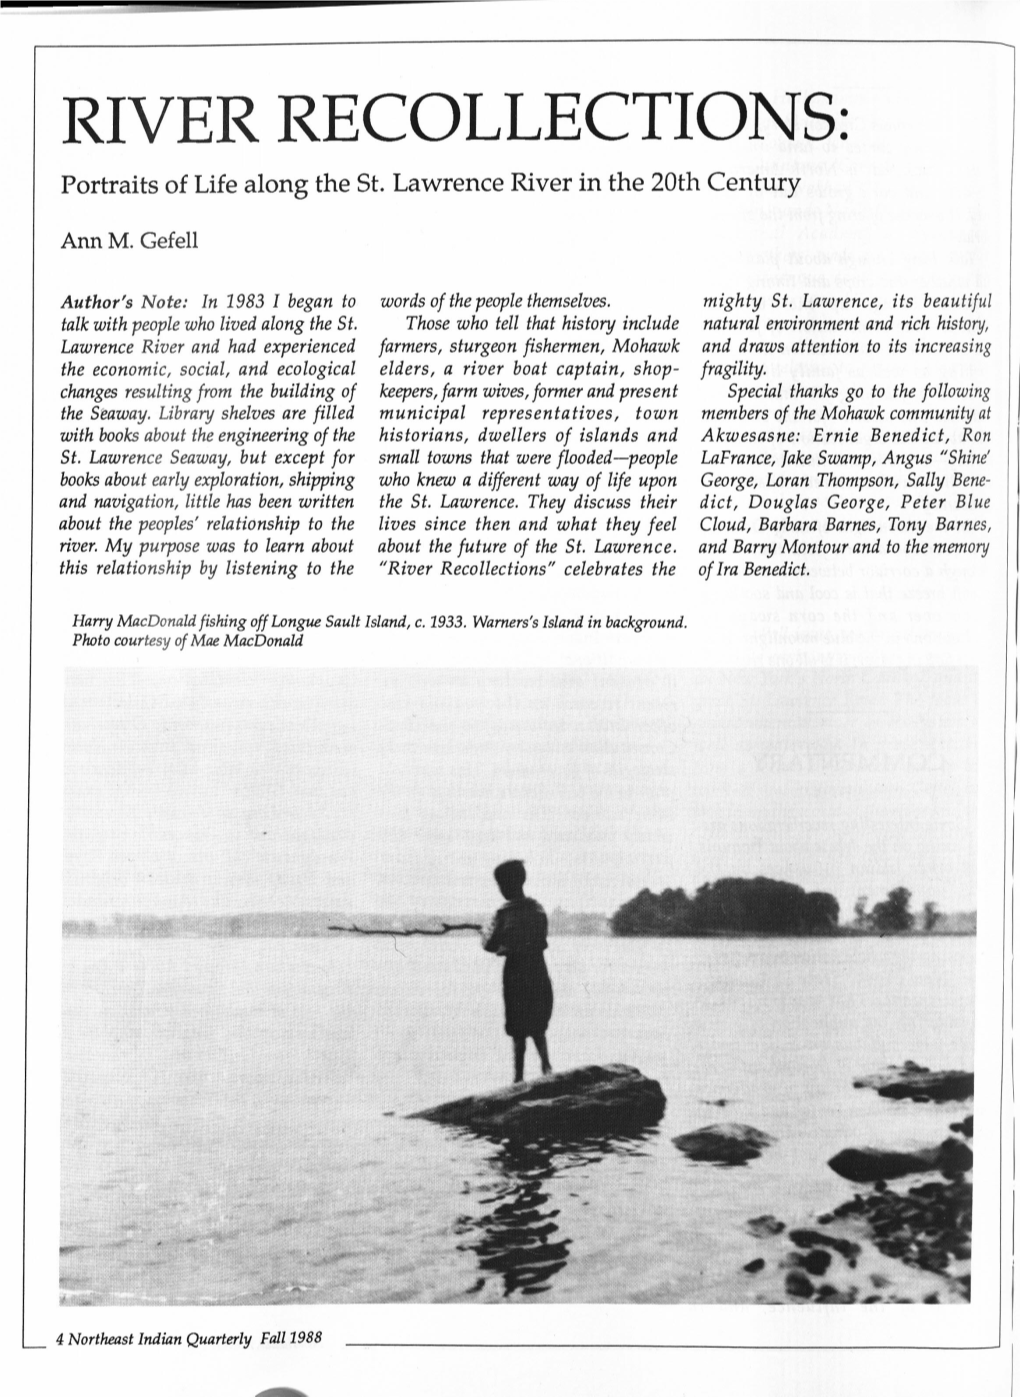 Anne's Article About Life on the St. Lawrence River